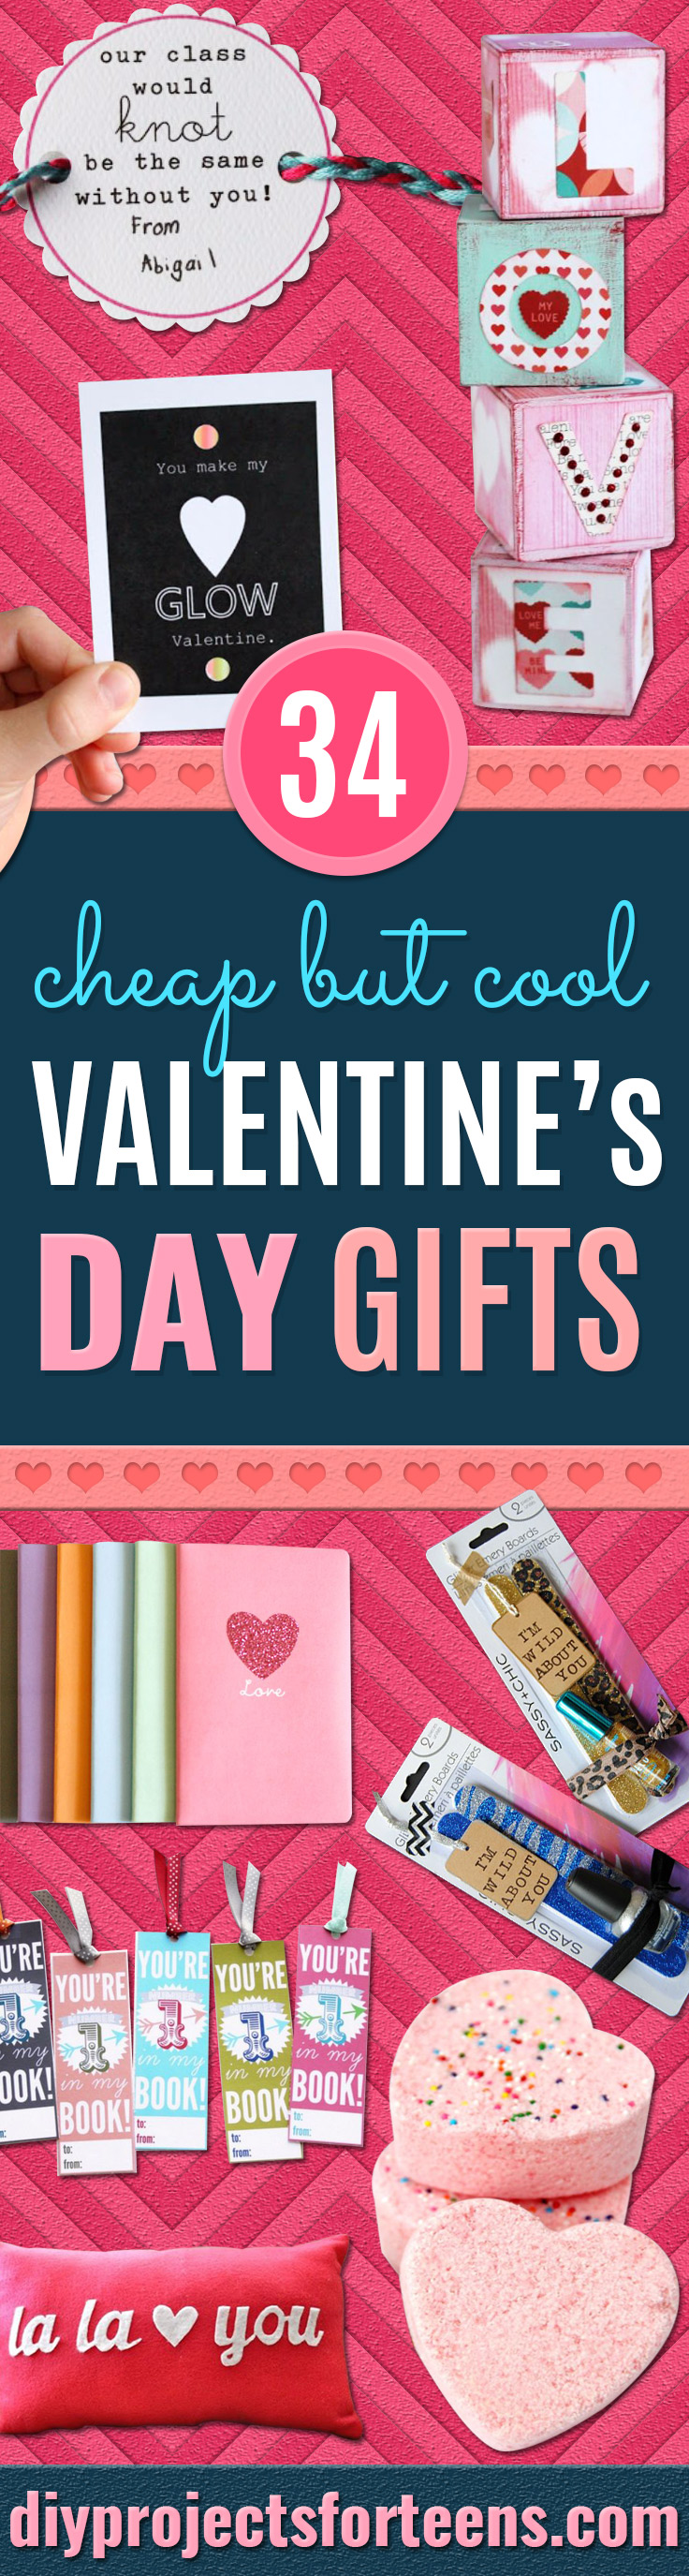 Cheap DIY Valentine's Day Gift Ideas - Make These Easy and Inexpensive Crafts and Valentine Projects - Cute Dollar Store Ideas, Tutorials for Making Jars, Gift Boxes, Pink Red and Heart Shaped Decor - Creative Ways To Say I Love You to Your BFF, Boyfriend, Girlfriend, Husband, Wife and Kids #diyideas #valentines #cheapgifts #valentinesgifts #valentinesday